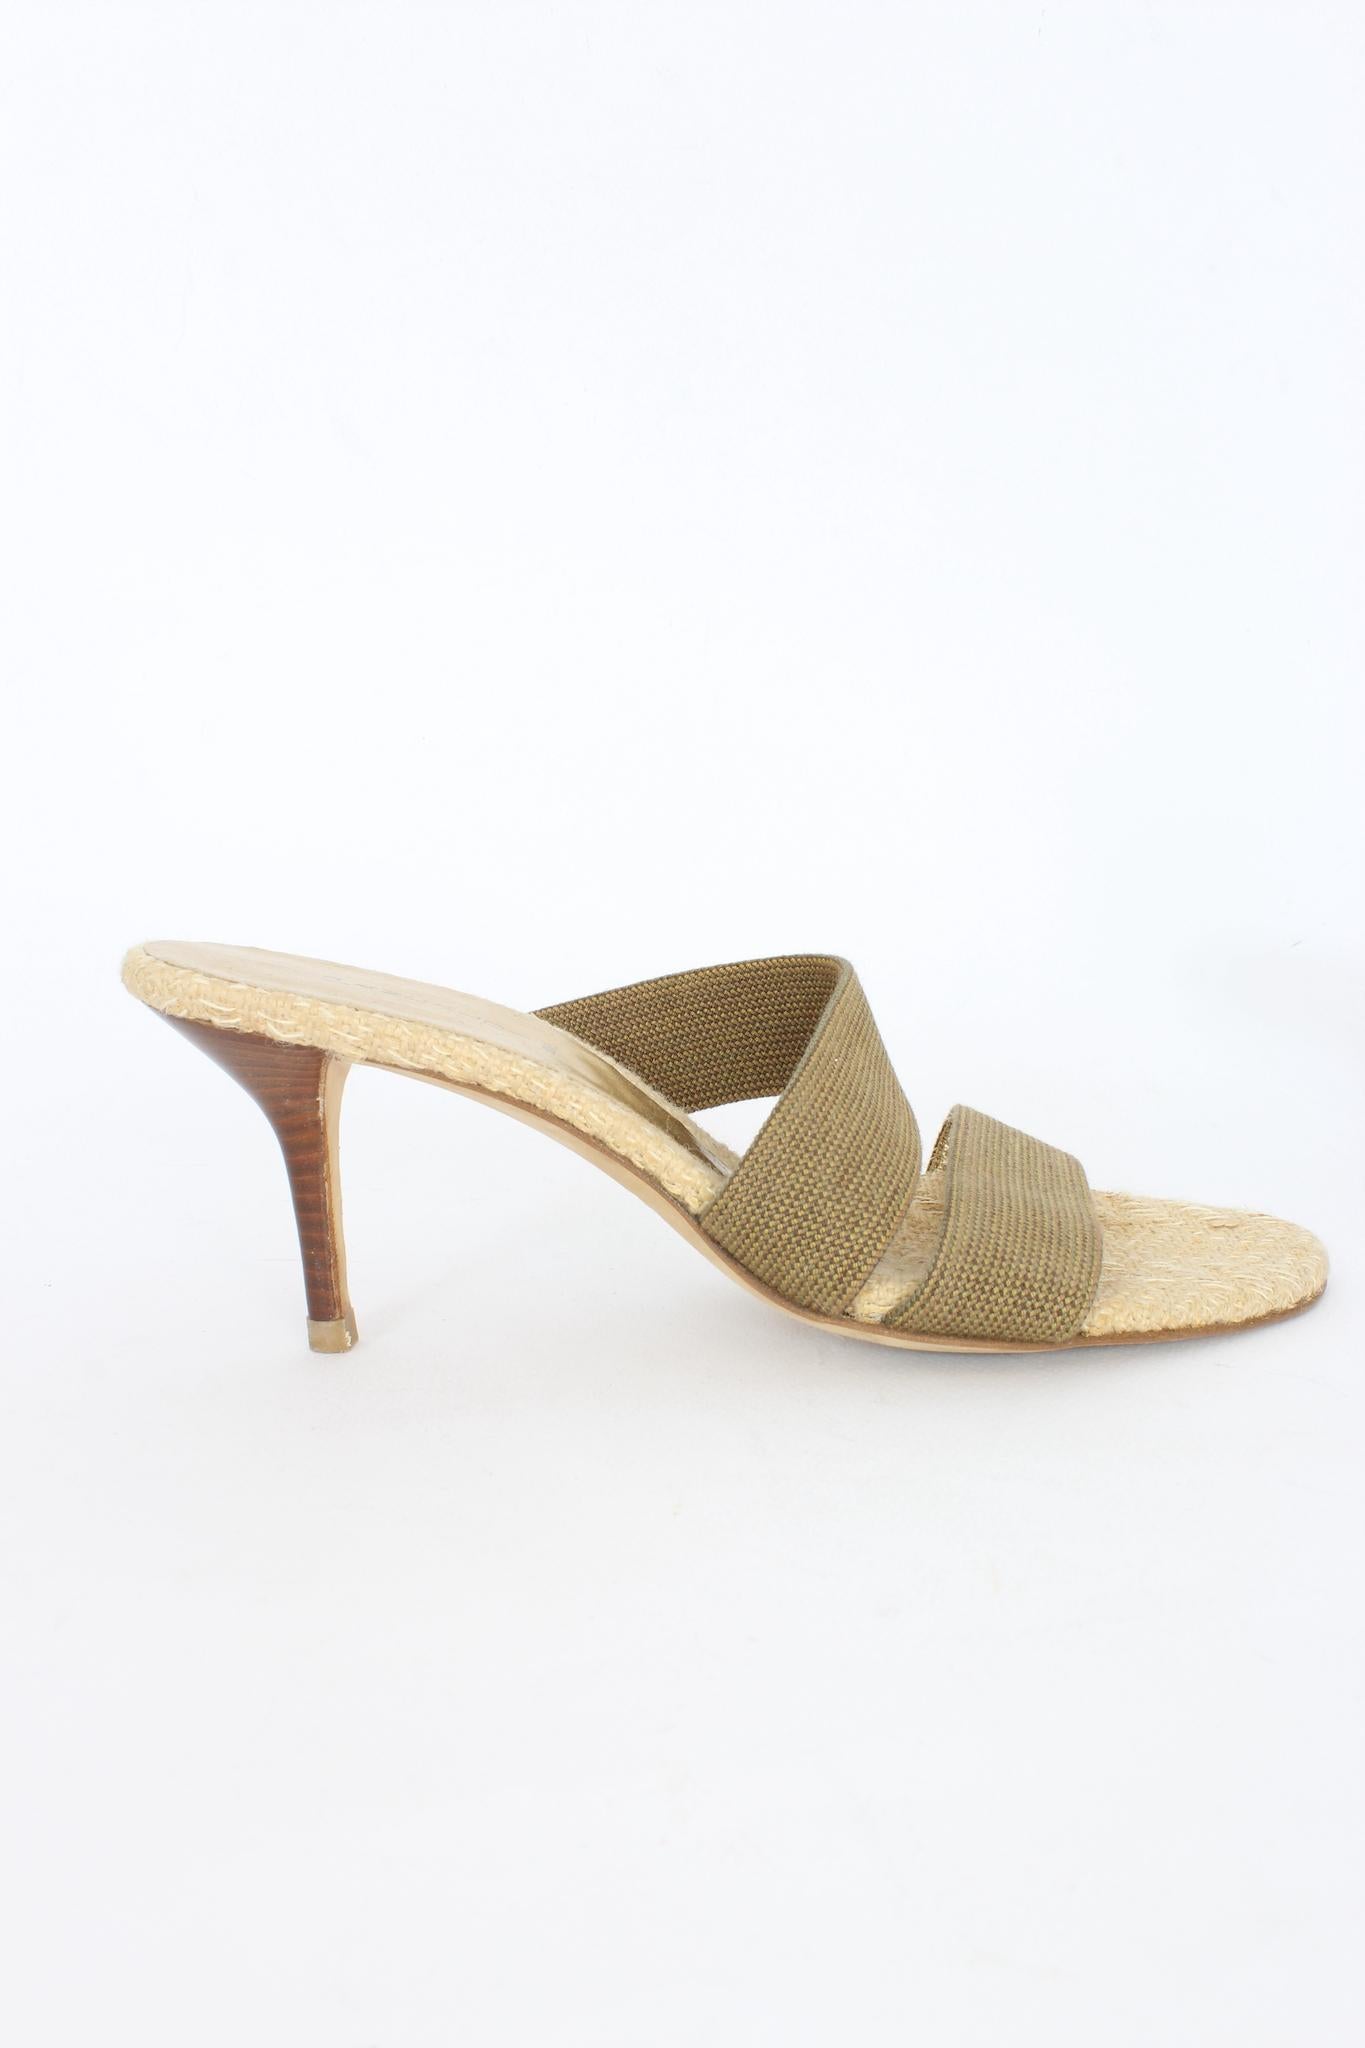 Pancaldi vintage sandal shoes from the 90s. Raffia sole and elastic bands on the instep, stiletto heel. Beige and brown color. Outer sole 100% leather. Made in italy.

Size: 38 It 7.5 Us 5 Uk

Length: 25 cm
Heel height: 6.5 cm